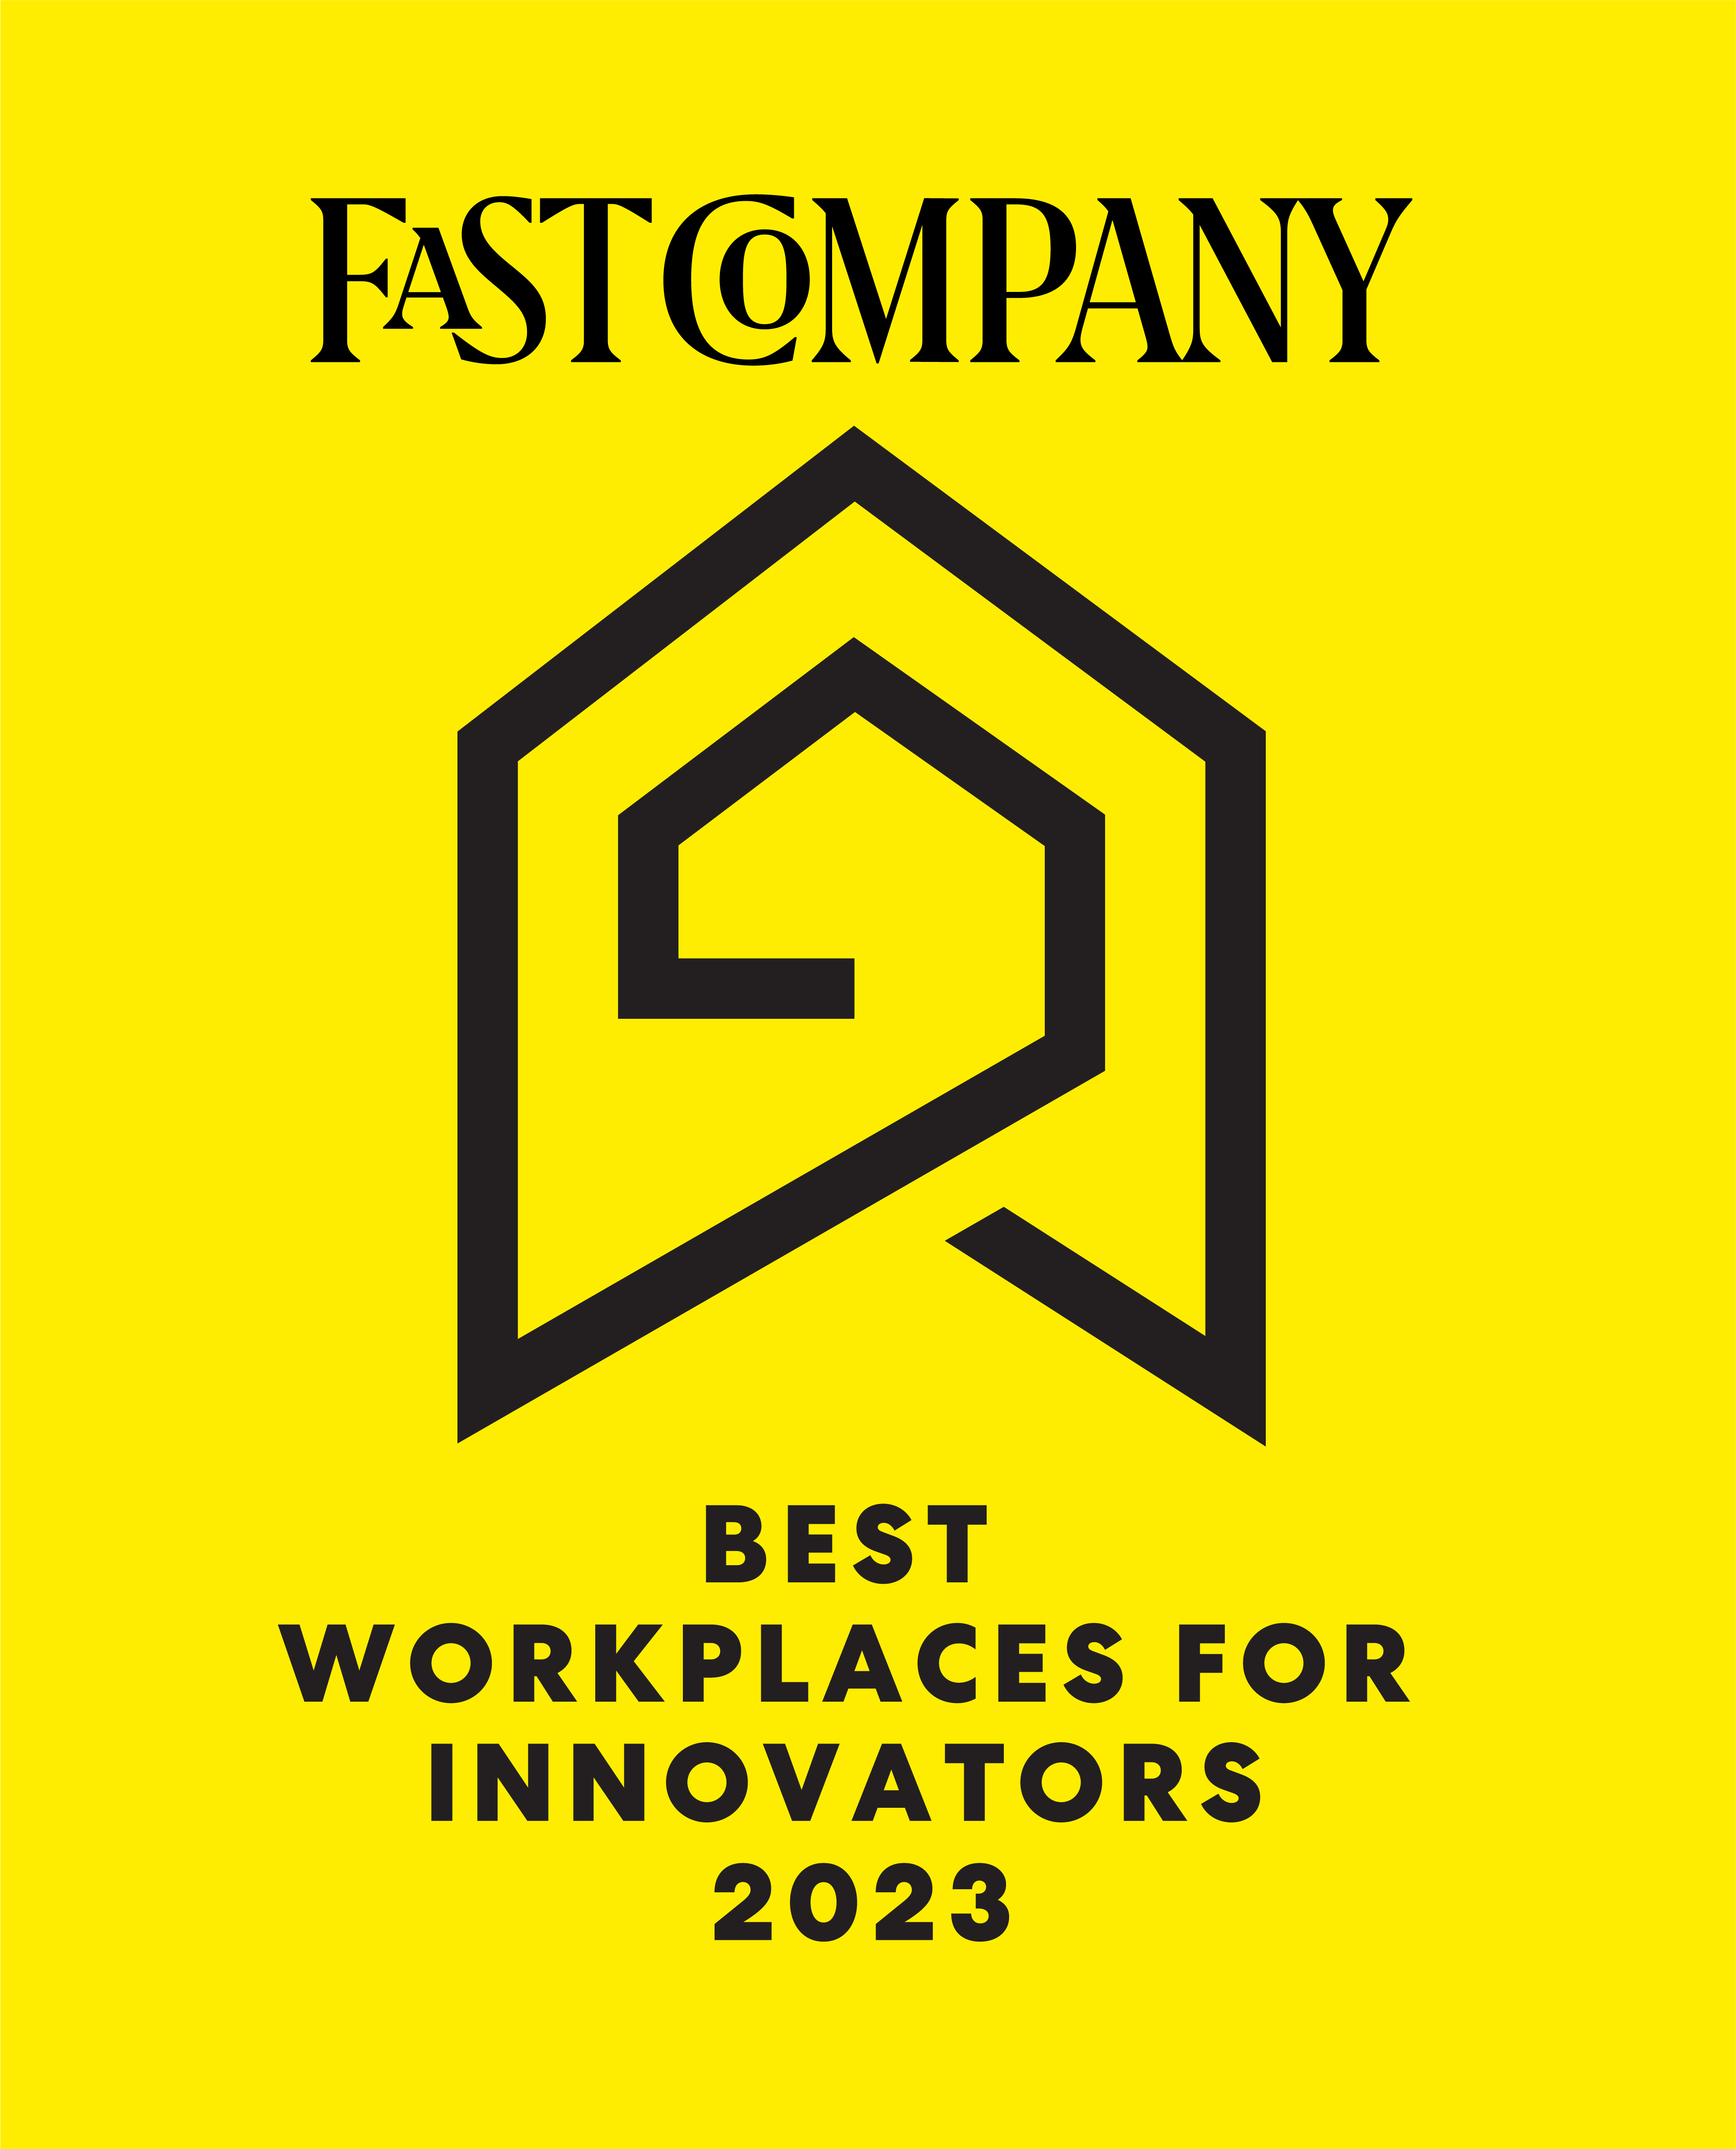 FastCompany Best Workplaces for Innovators 2023